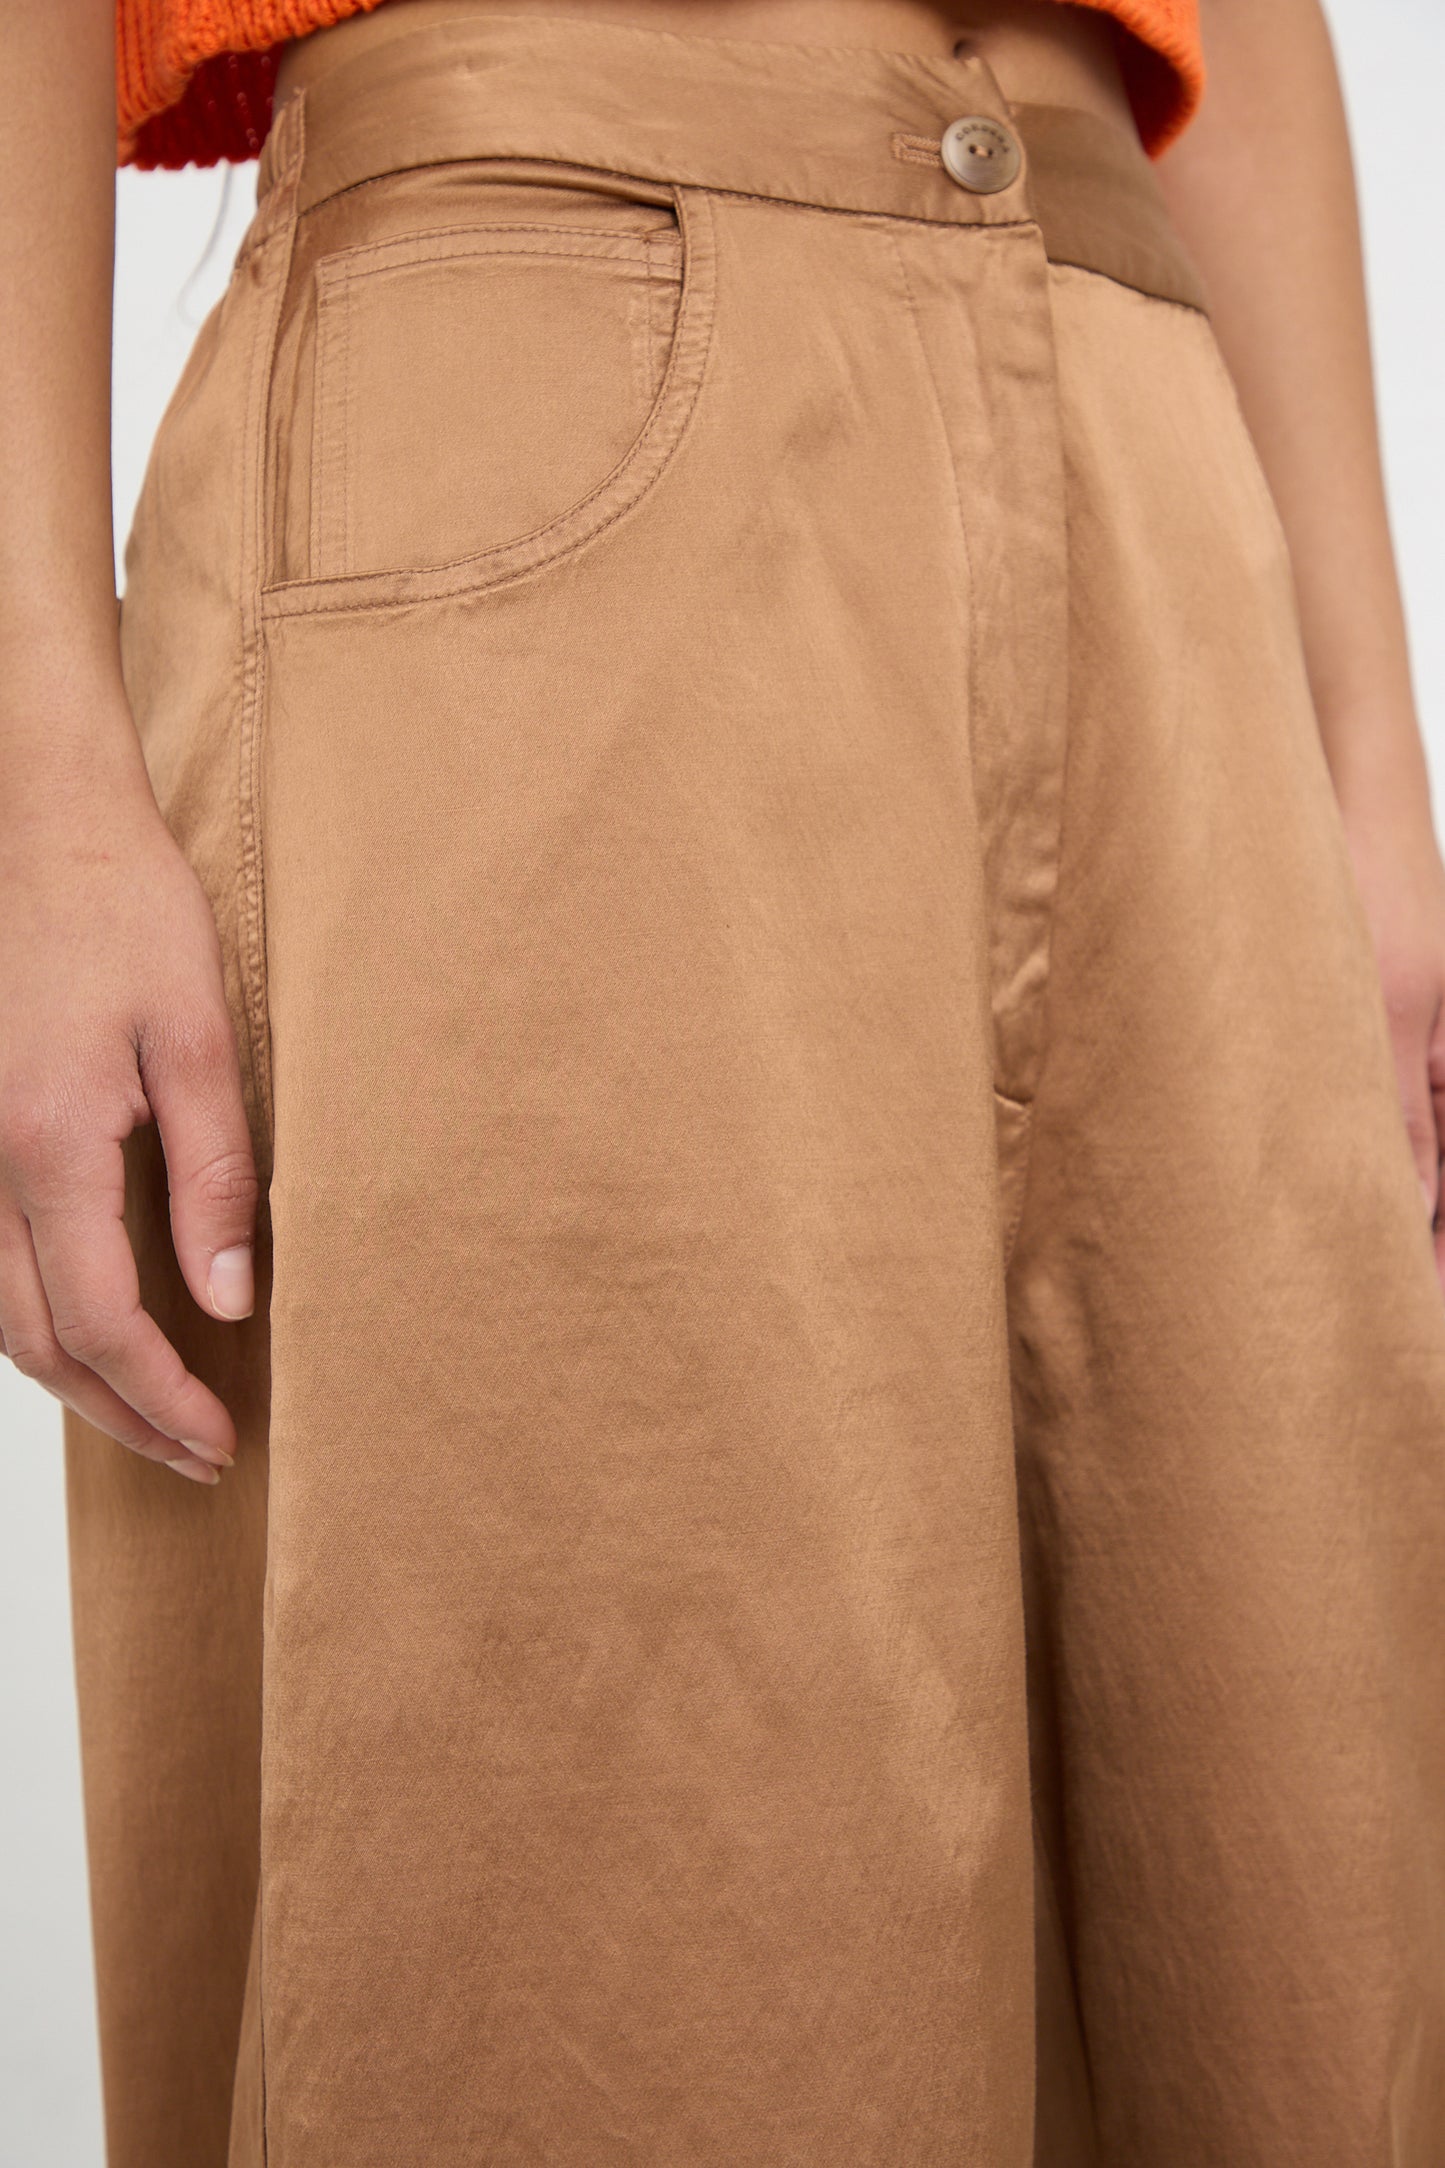 Close-up of a person wearing Cordera's Satin Curved Pant in Camel with a detailed view of the high-rise waistband and pocket, emphasizing ethical fashion.